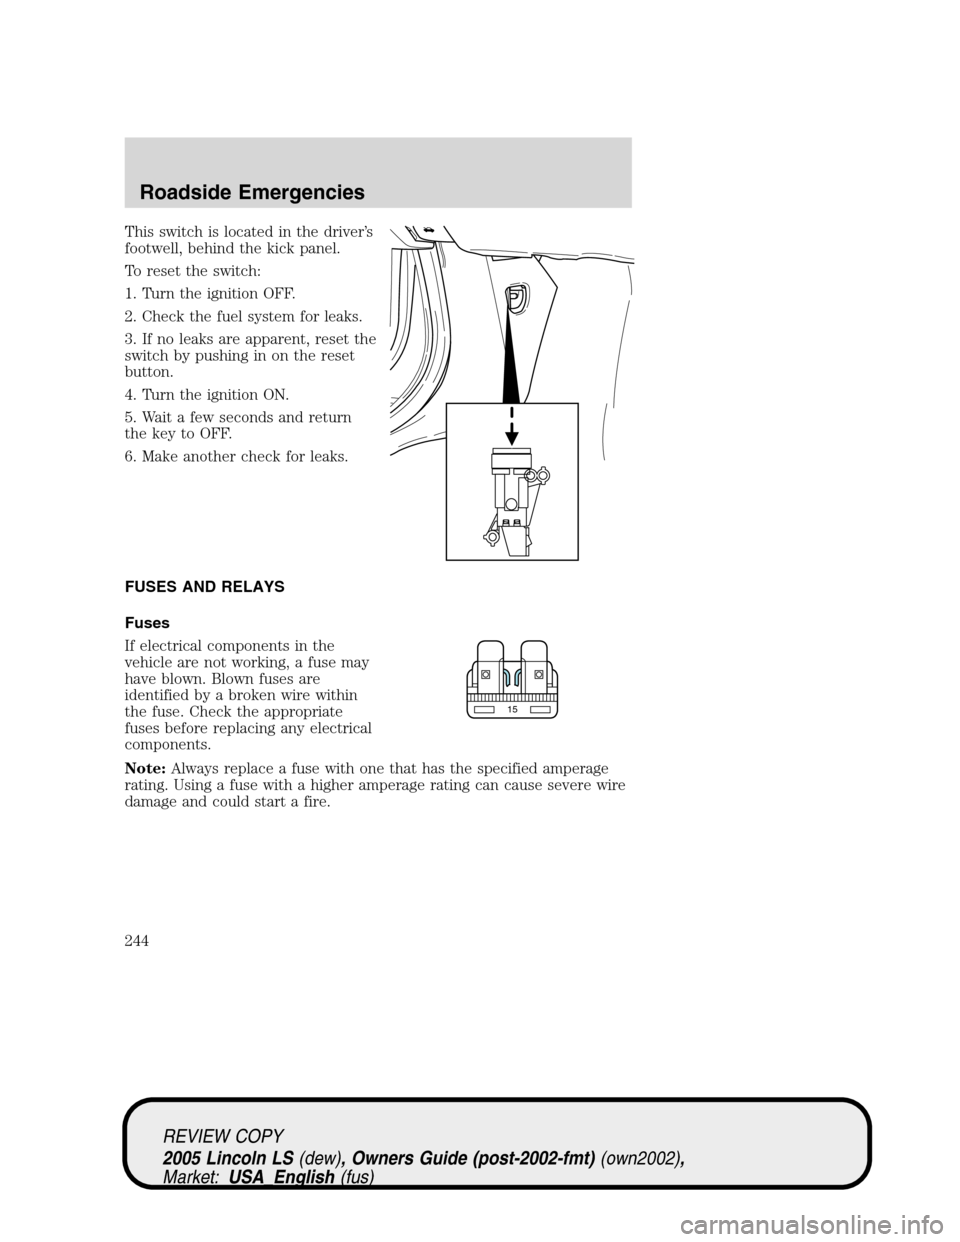 LINCOLN LS 2005  Owners Manual This switch is located in the driver’s
footwell, behind the kick panel.
To reset the switch:
1. Turn the ignition OFF.
2. Check the fuel system for leaks.
3. If no leaks are apparent, reset the
swit